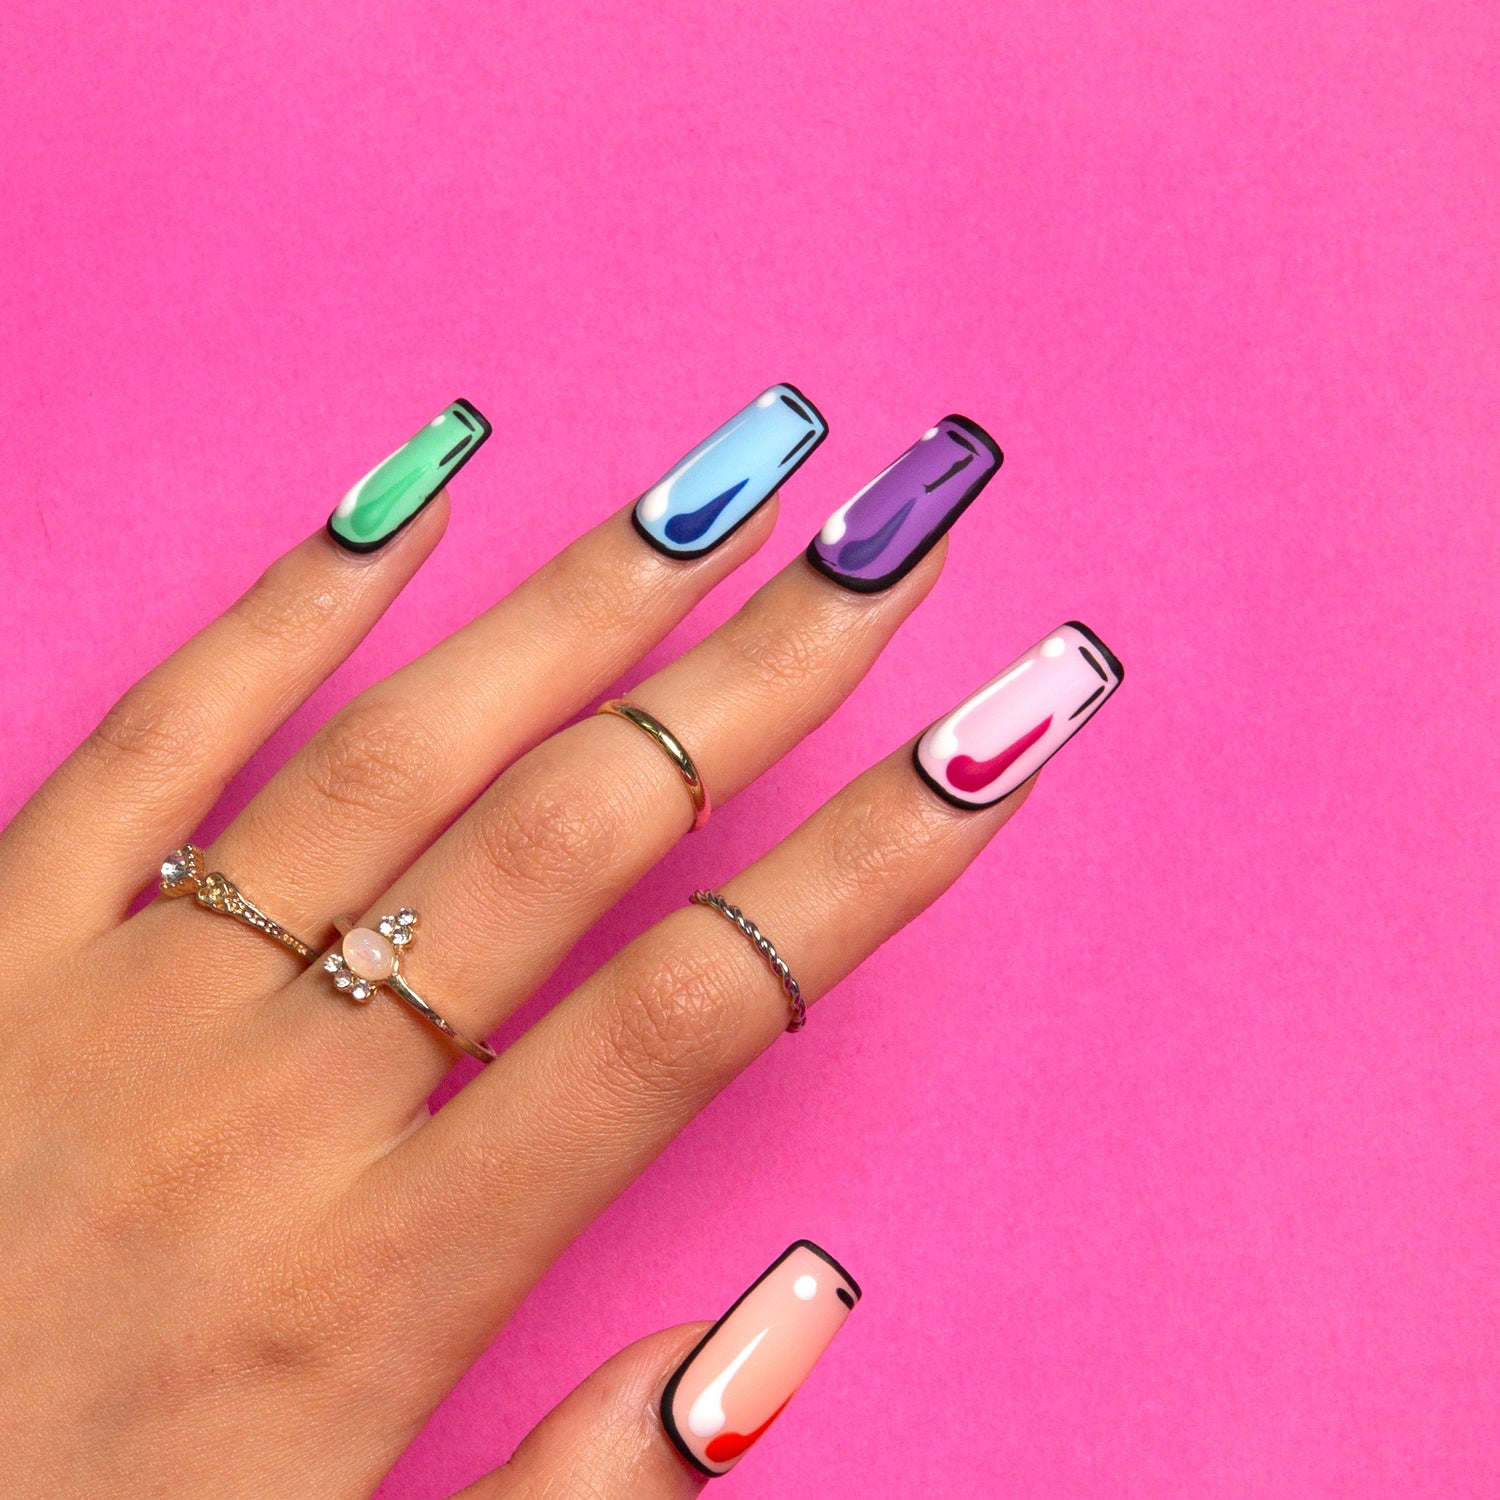 Hand with colorful pop art design press-on nails in green, blue, purple, pink, and orange, adorned with delicate rings, against a bright pink background. 'H116 - Colorful Pop - Square' collection from Lovful.